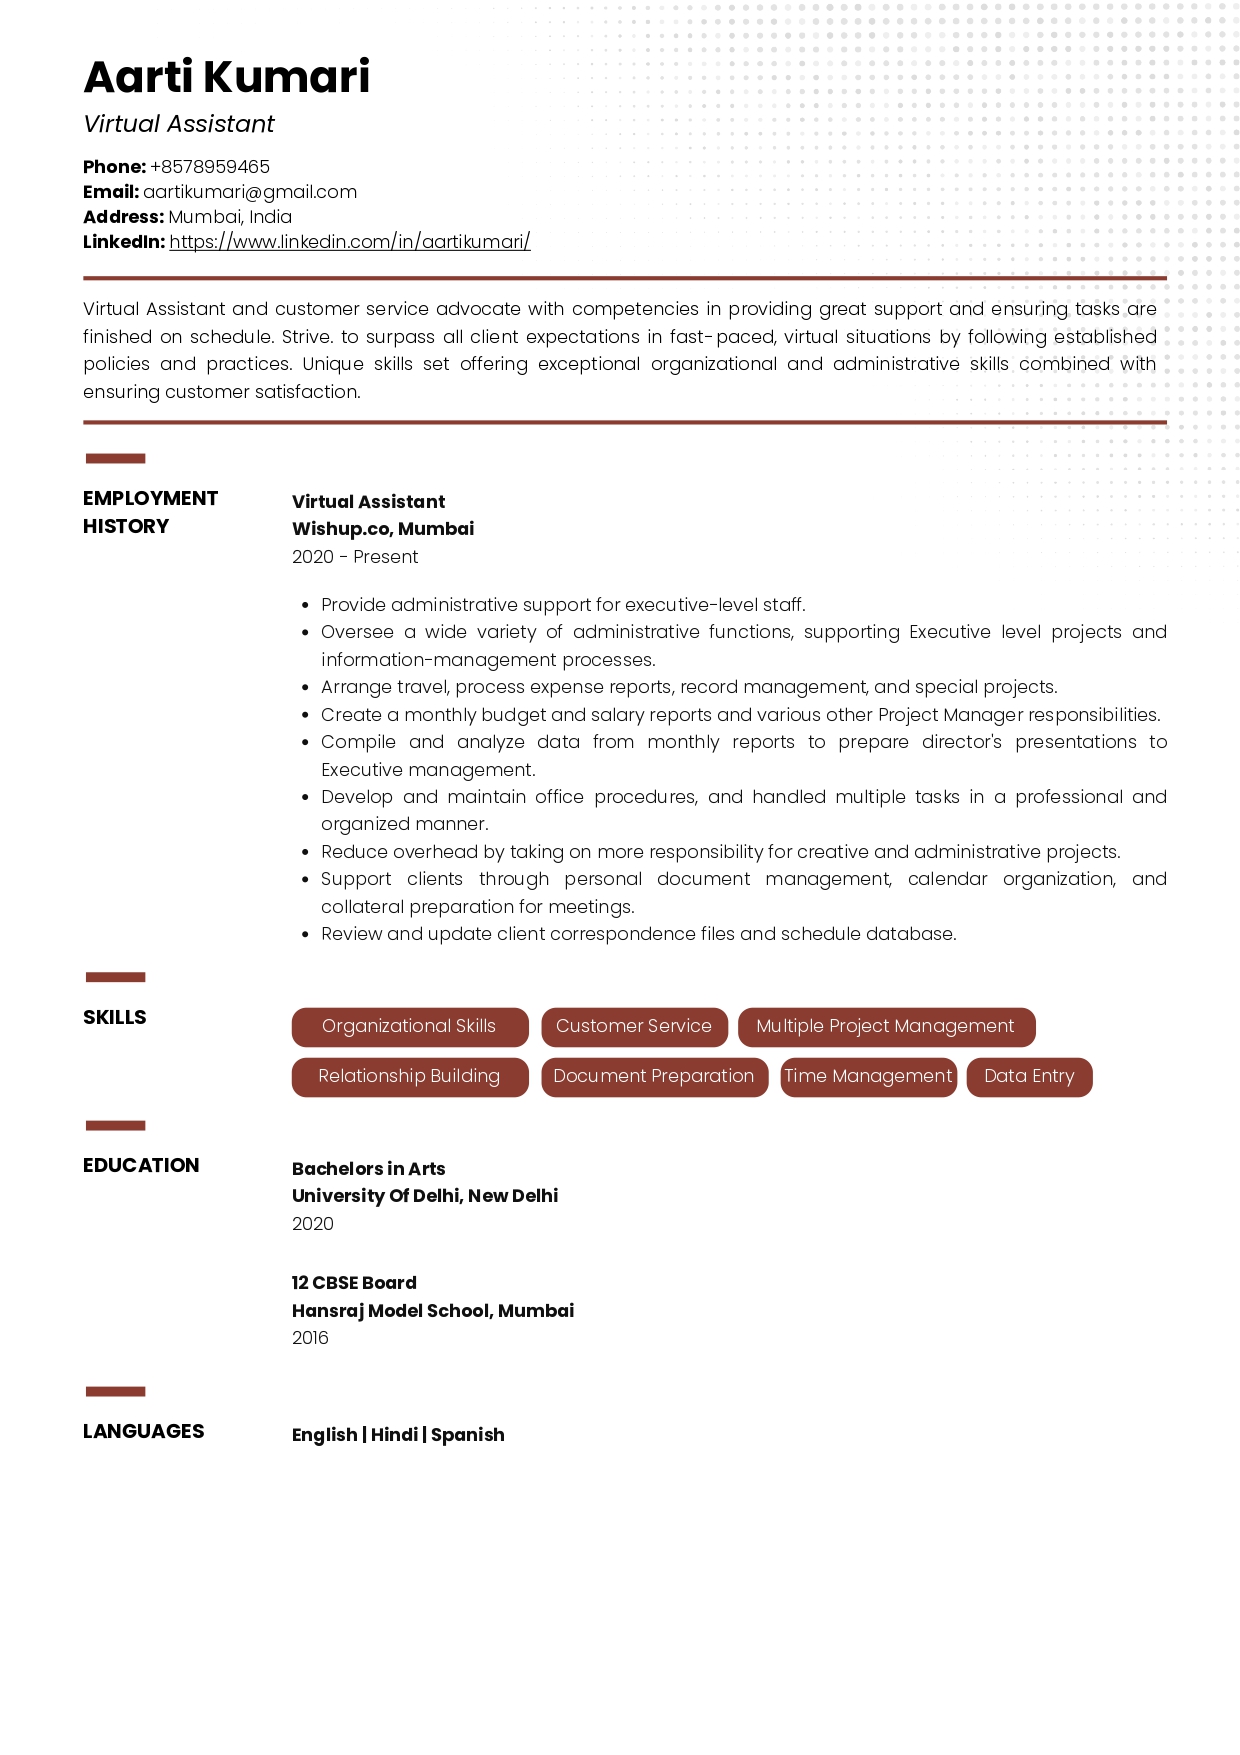 Resume of Virtual Assistant